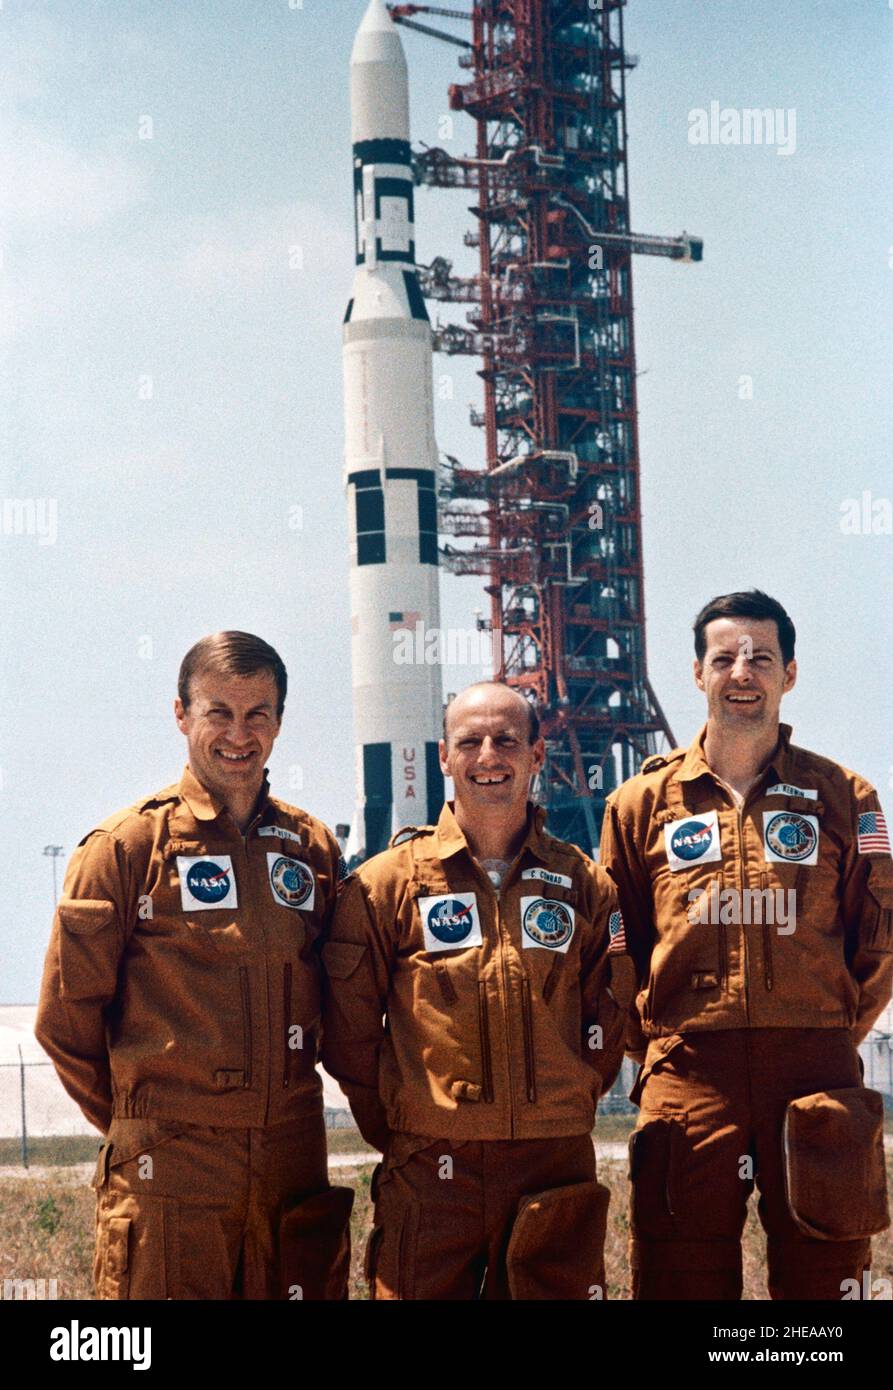 (4 May 1973) --- The three prime crew members of the first manned Skylab mission (Skylab 2) are photographed at Launch Complex 39, Kennedy Space Center, during preflight activity. They are, left to right, astronaut Paul J. Weitz, pilot; astronaut Charles Conrad Jr., commander; and scientist-astronaut Joseph P. Kerwin, science pilot. In the background is the Skylab 1/Saturn V space vehicle with its Skylab space station payload on Pad A Stock Photo